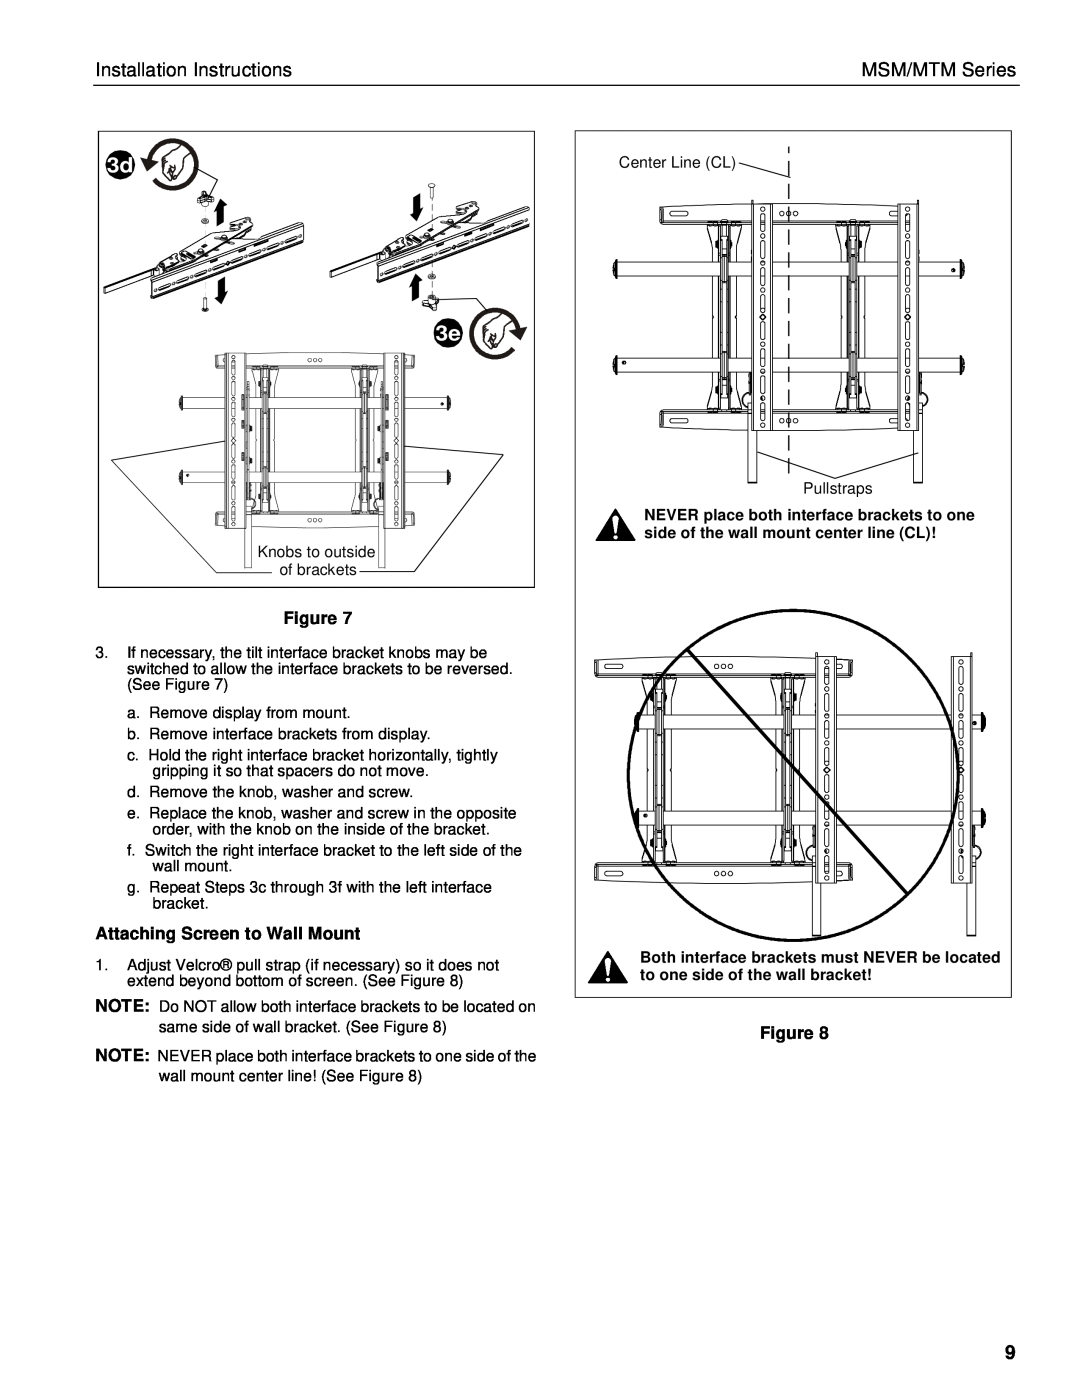 Chief Manufacturing installation instructions Attaching Screen to Wall Mount, Installation Instructions, MSM/MTM Series 